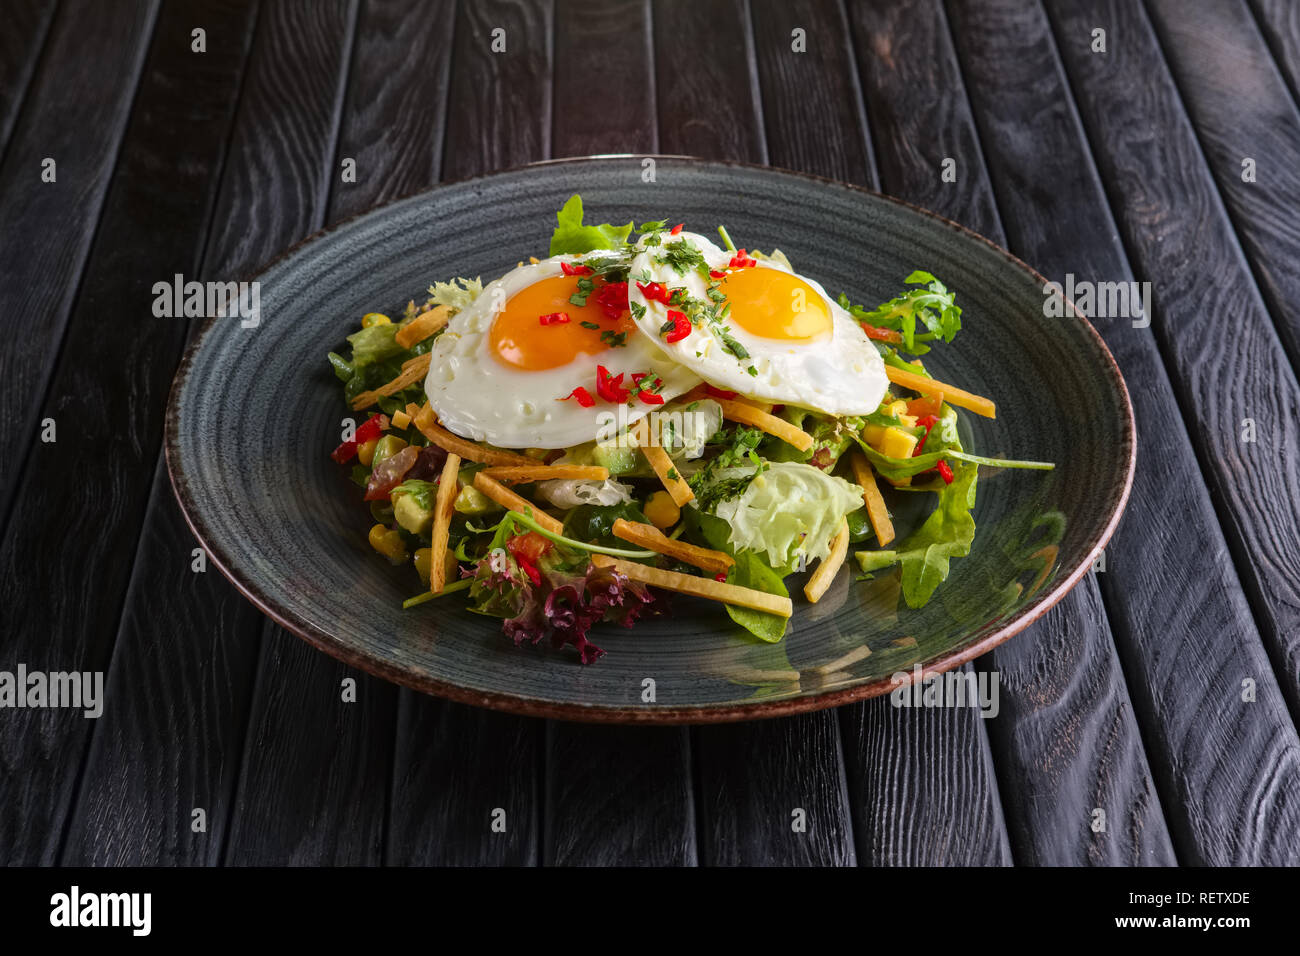 Fried eggs with avocado, salad leaves and crispy chips Stock Photo